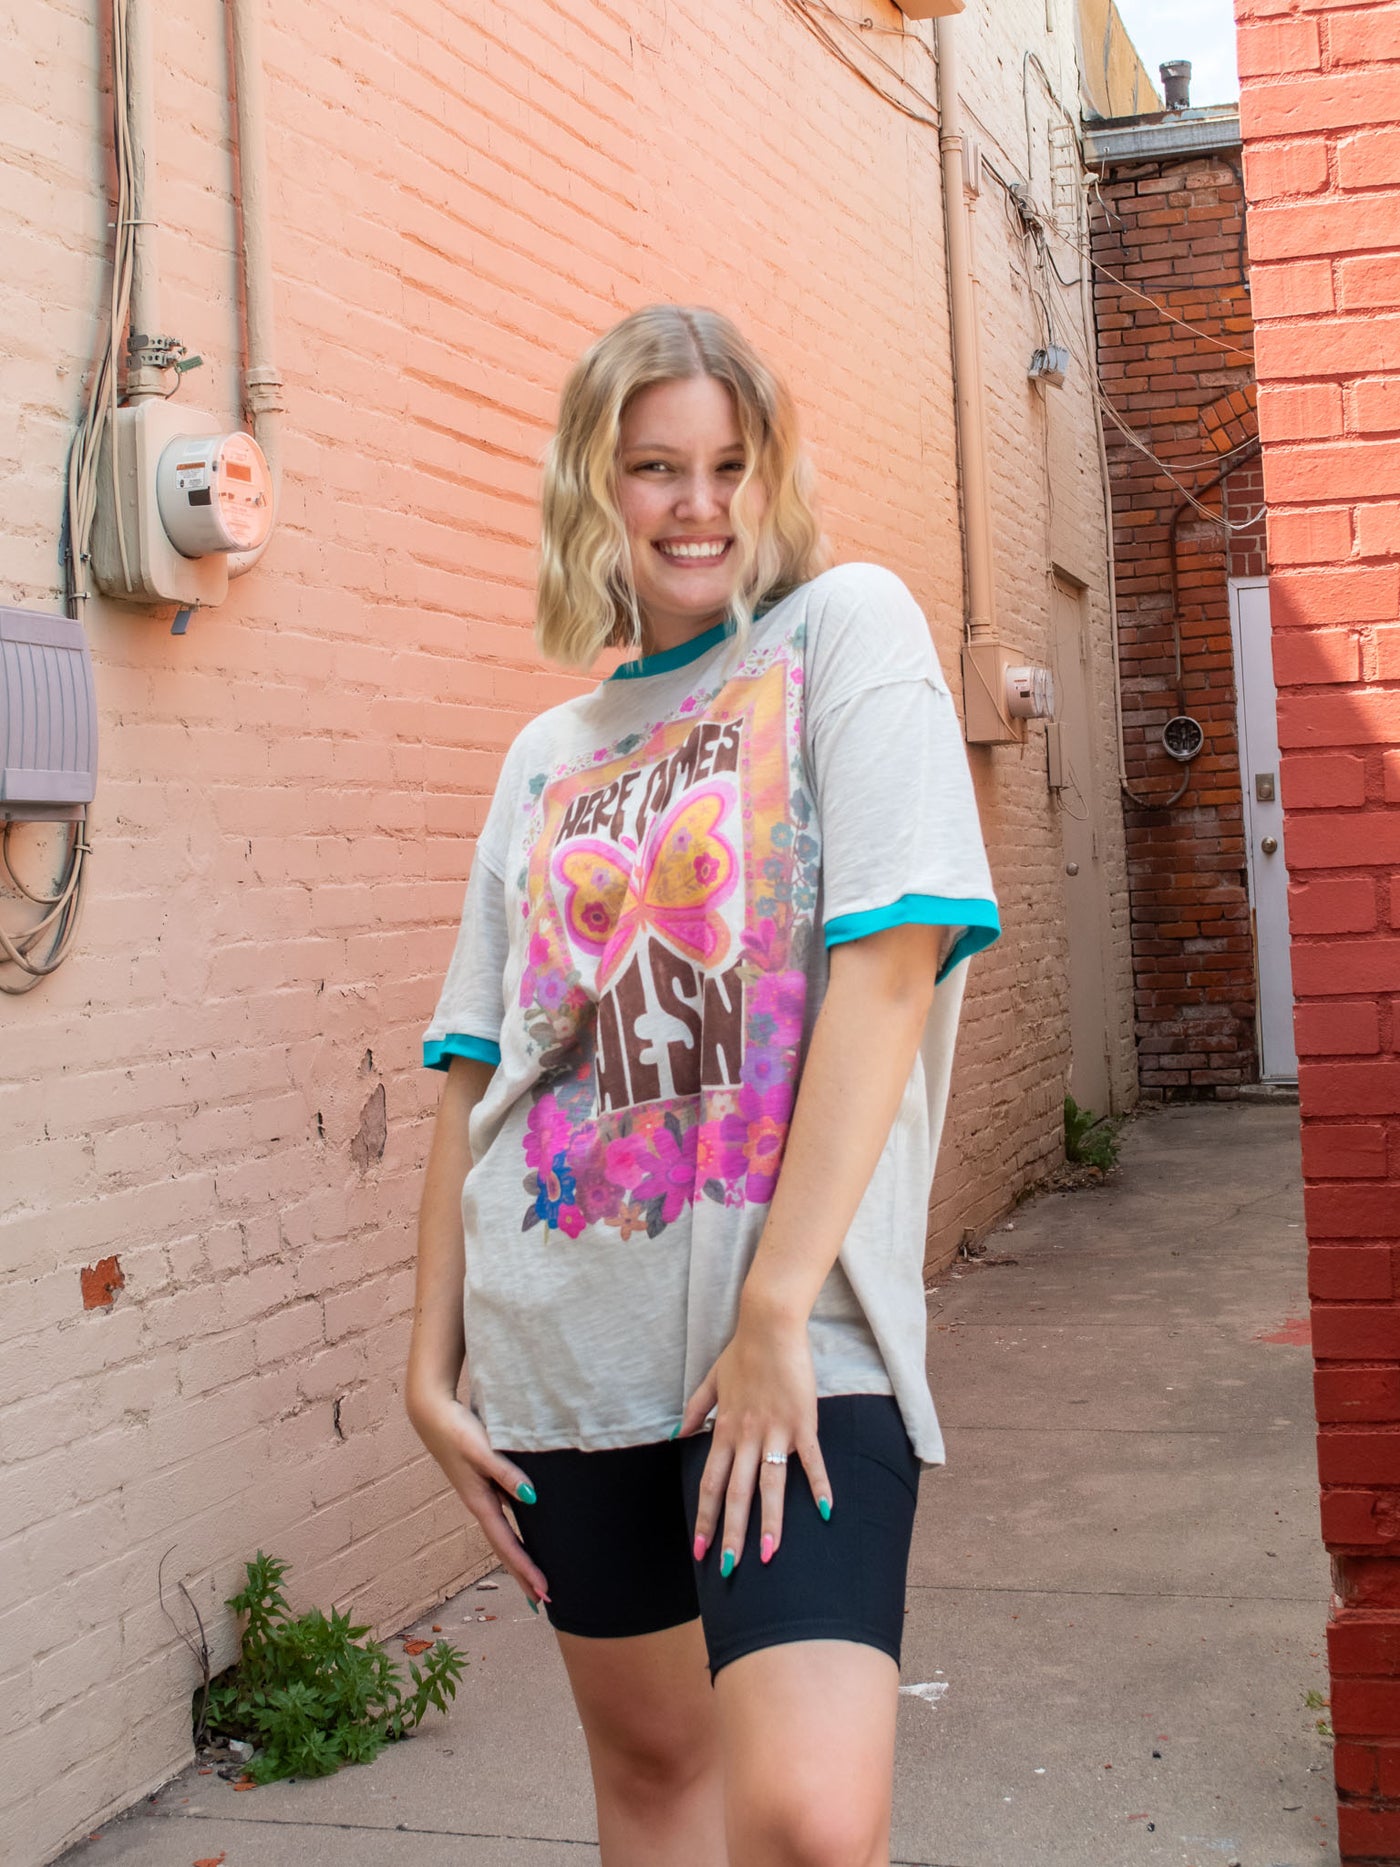 A model wearing an oversized gray graphic tee with contrasting teal blue bands on the sleeves and neckline, and the saying "here comes the sun" surrounded by flowers and butterflies. The model has it paired with black biker shorts.